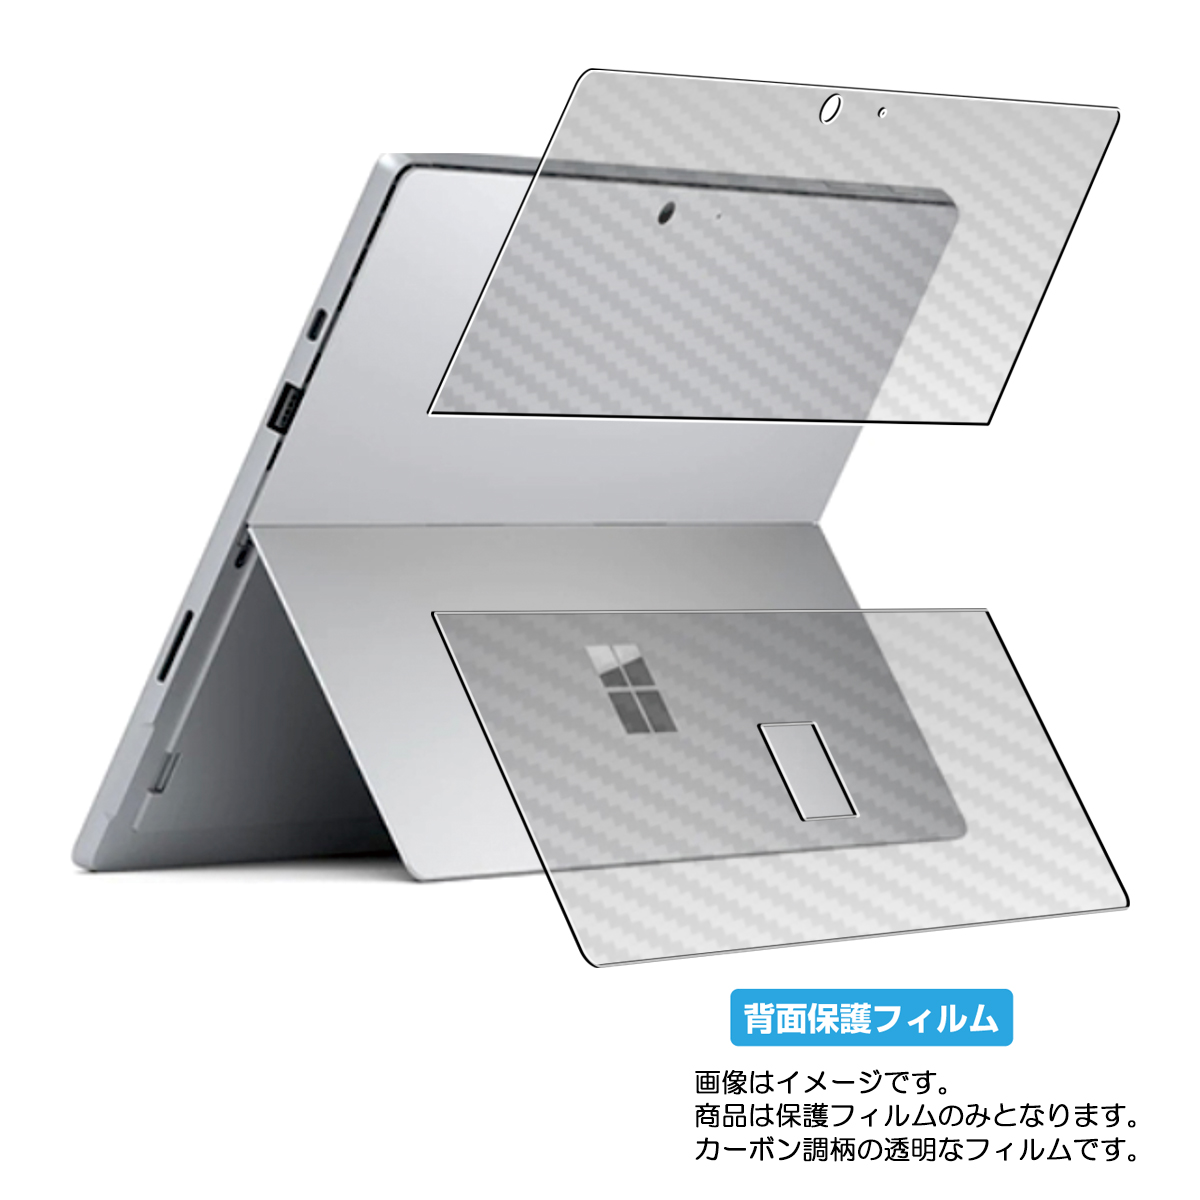 Microsoft Surface Pro    Surface Pro 用 [N35] カーボン調 クリア 背面 保護 フィルム ★ マイクロソフト サーフェス プロ セブン